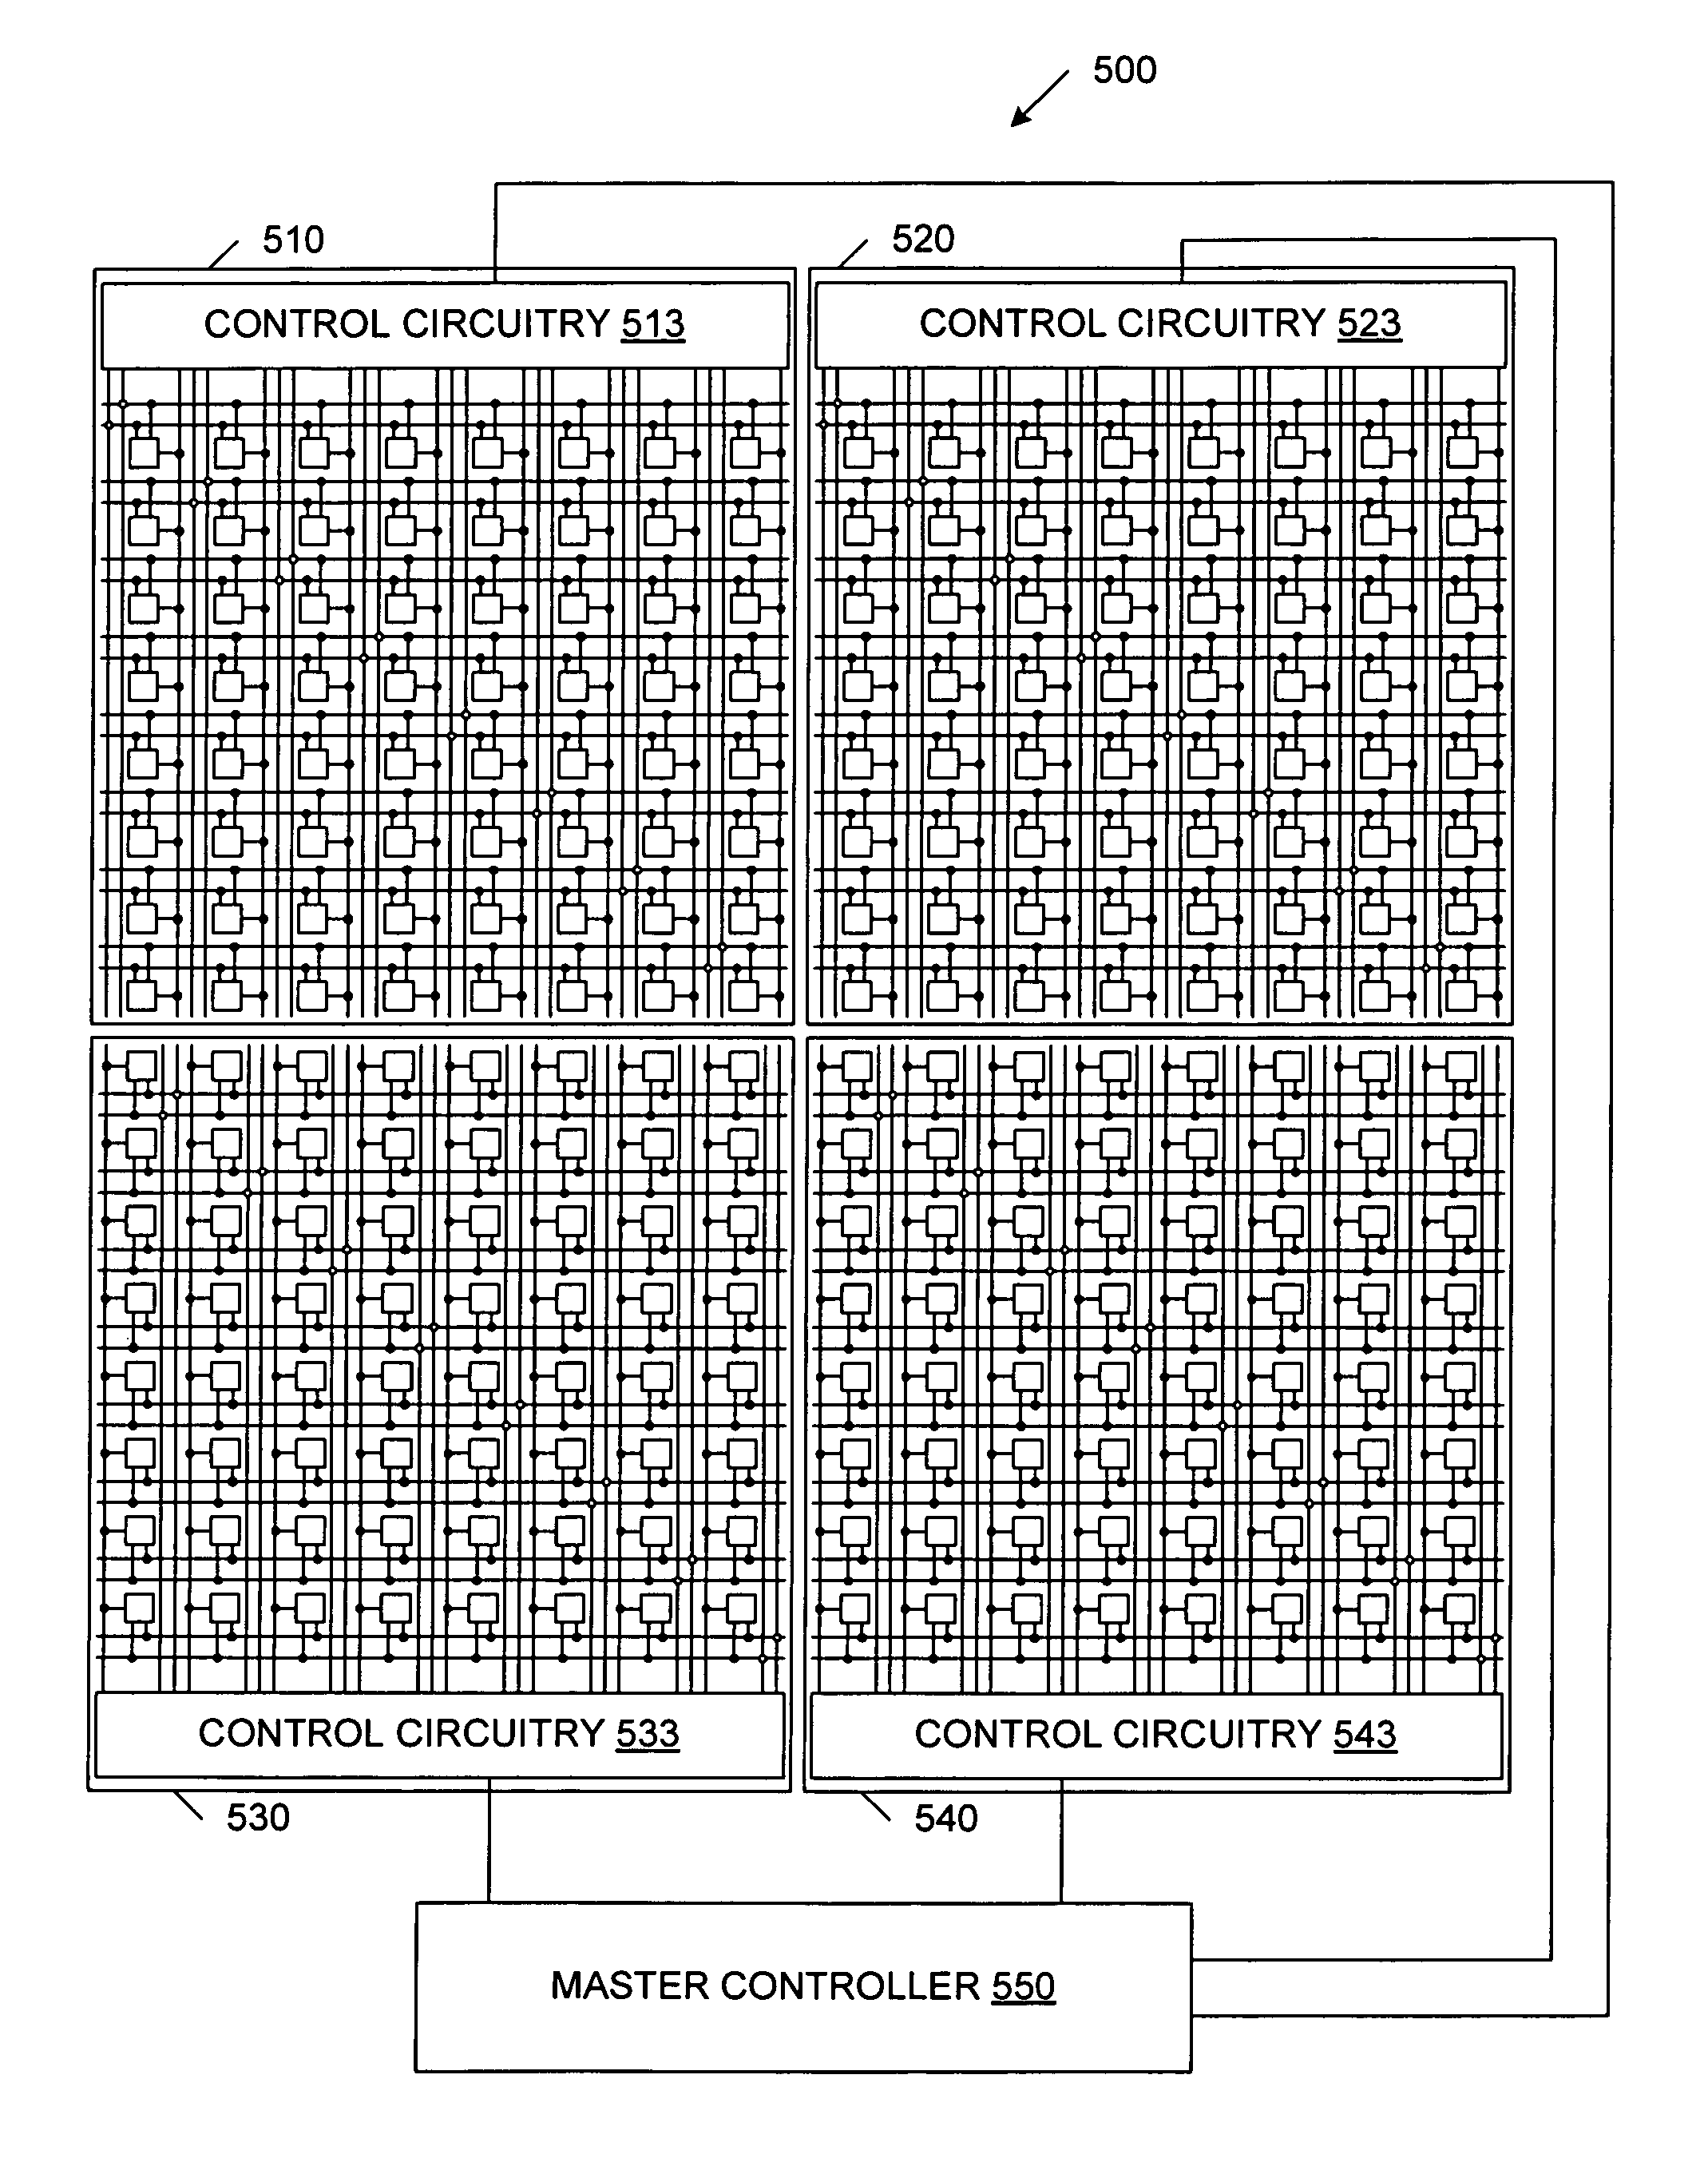 Horizontal row drivers for CMOS image sensor with tiling on three edges